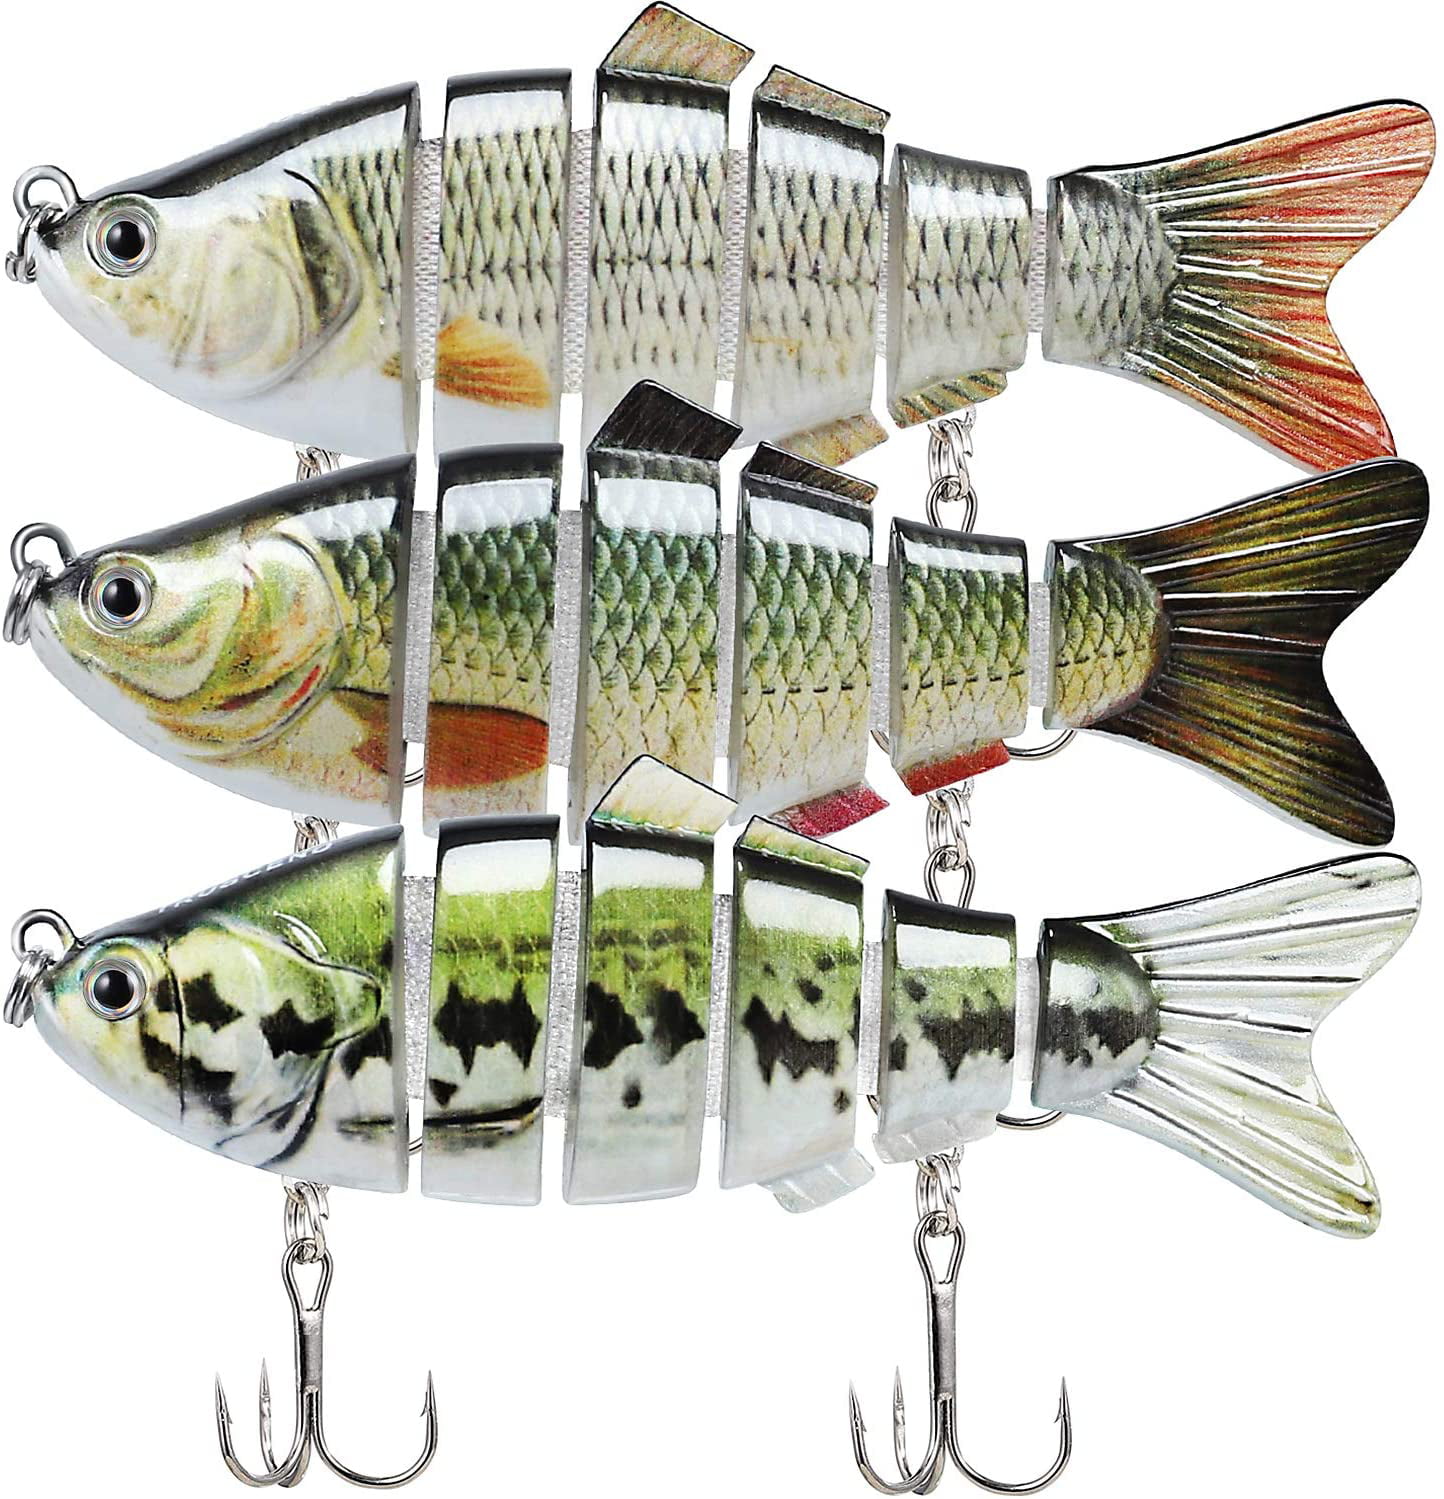 Realistic Fishing Lures Multi Jointed for Bass Trout Walleye Predator Fish 3pack for sale online 